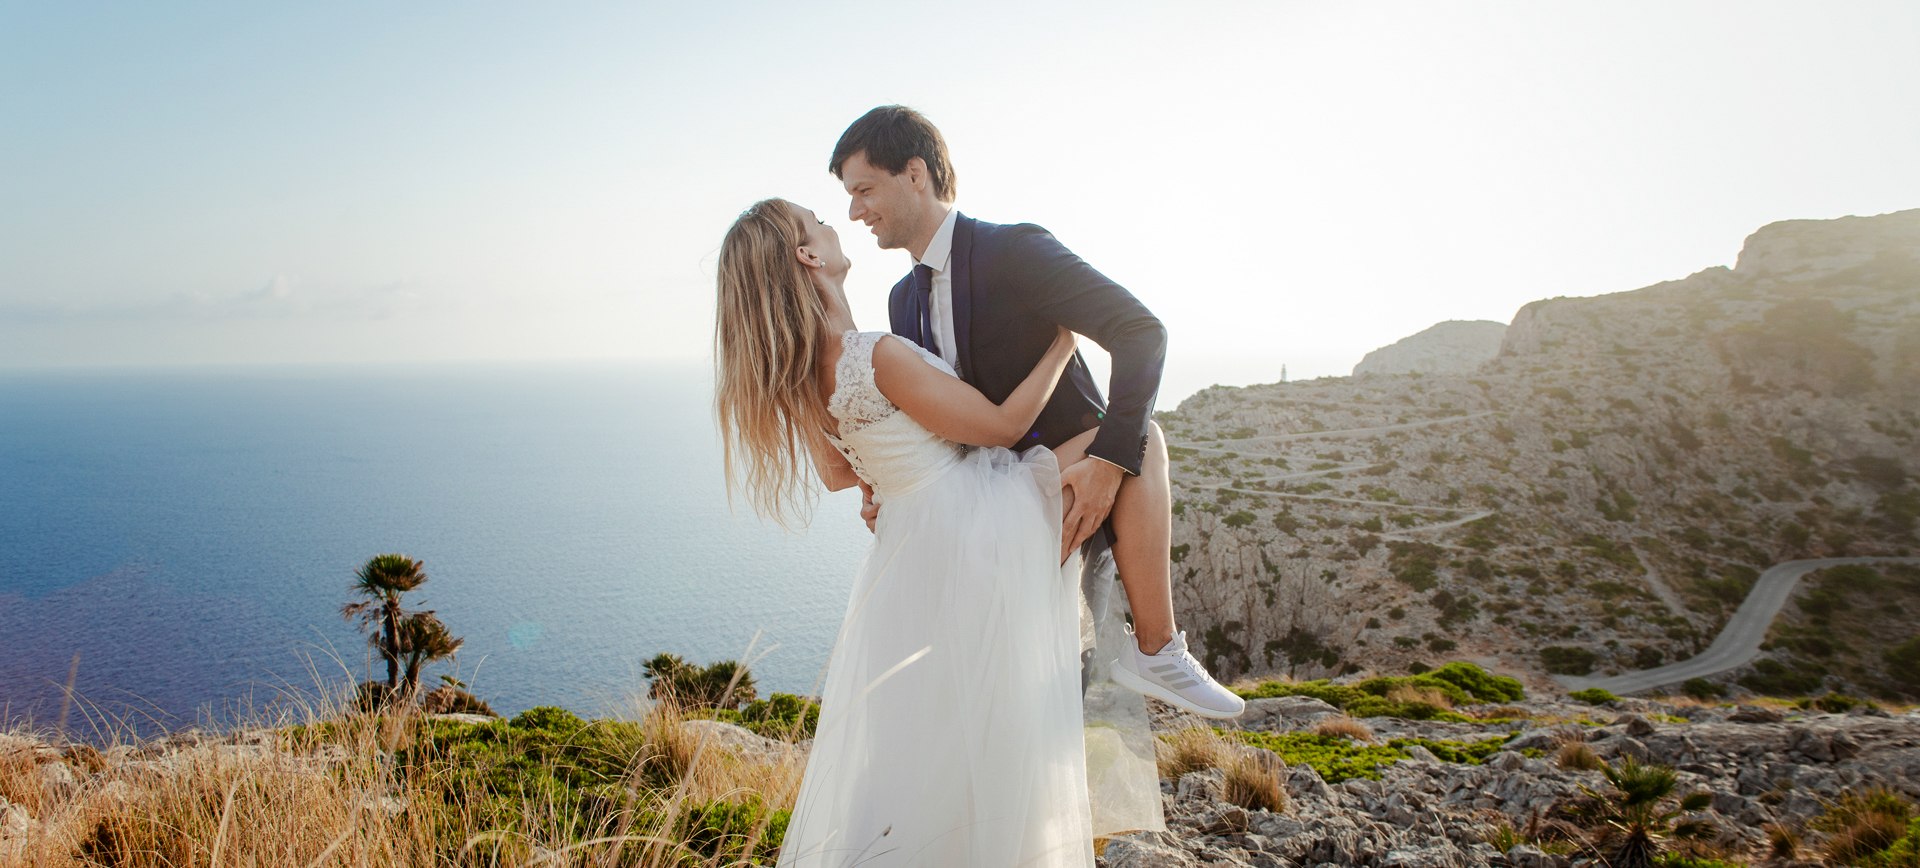 Mallorca beach elopement in Formentor - bride and groom on cliffs during their wedding day